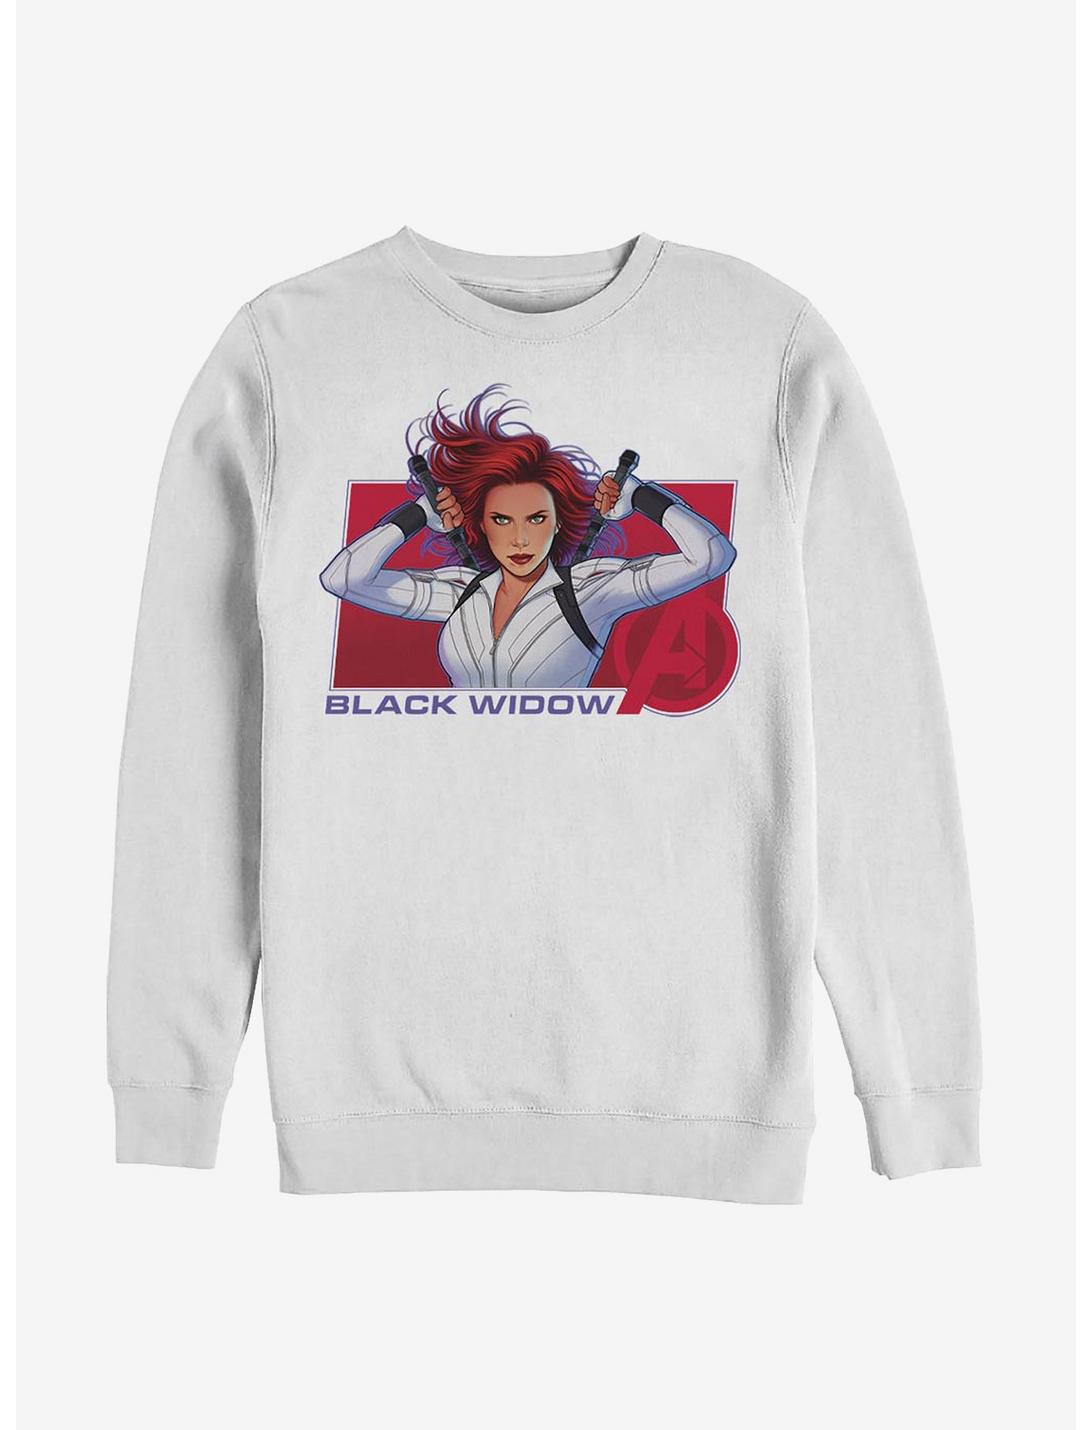 Marvel Black Widow Ready For Action Sweatshirt, WHITE, hi-res